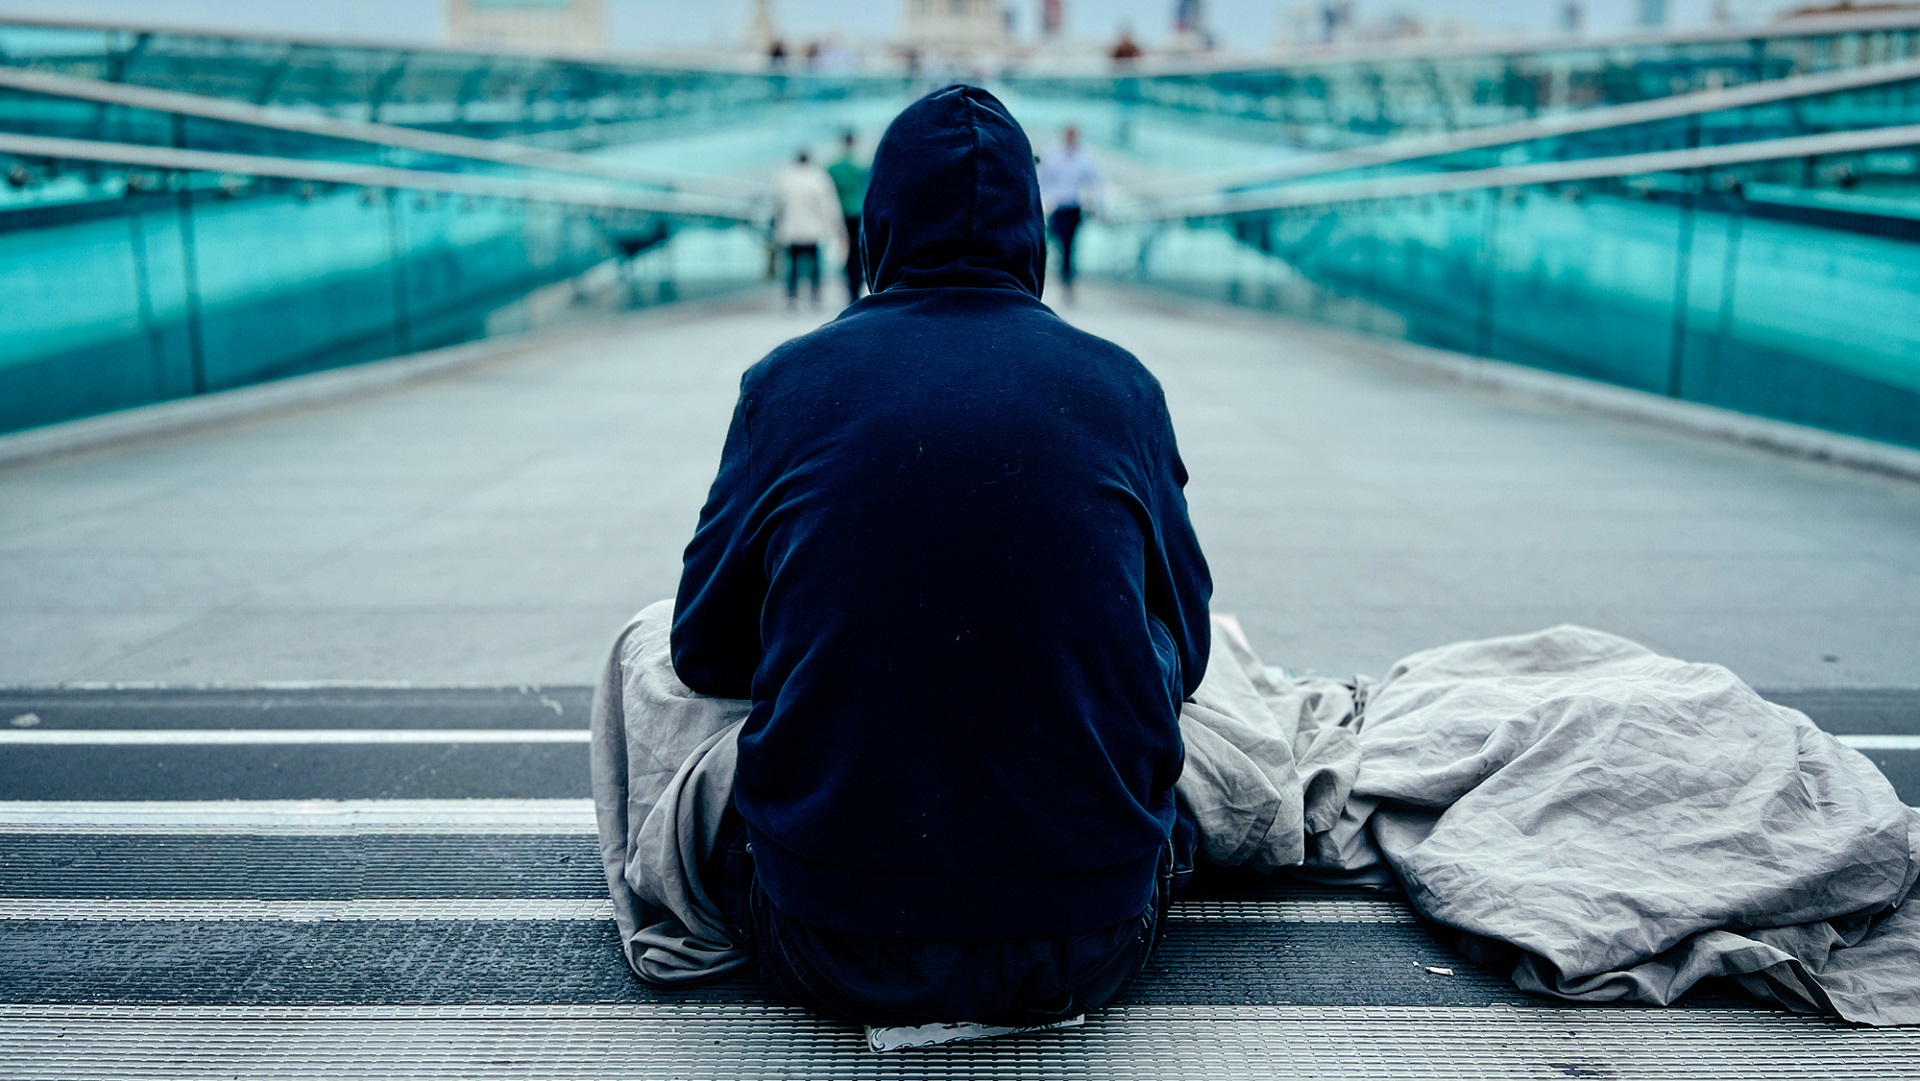 rough sleeping and homelessness